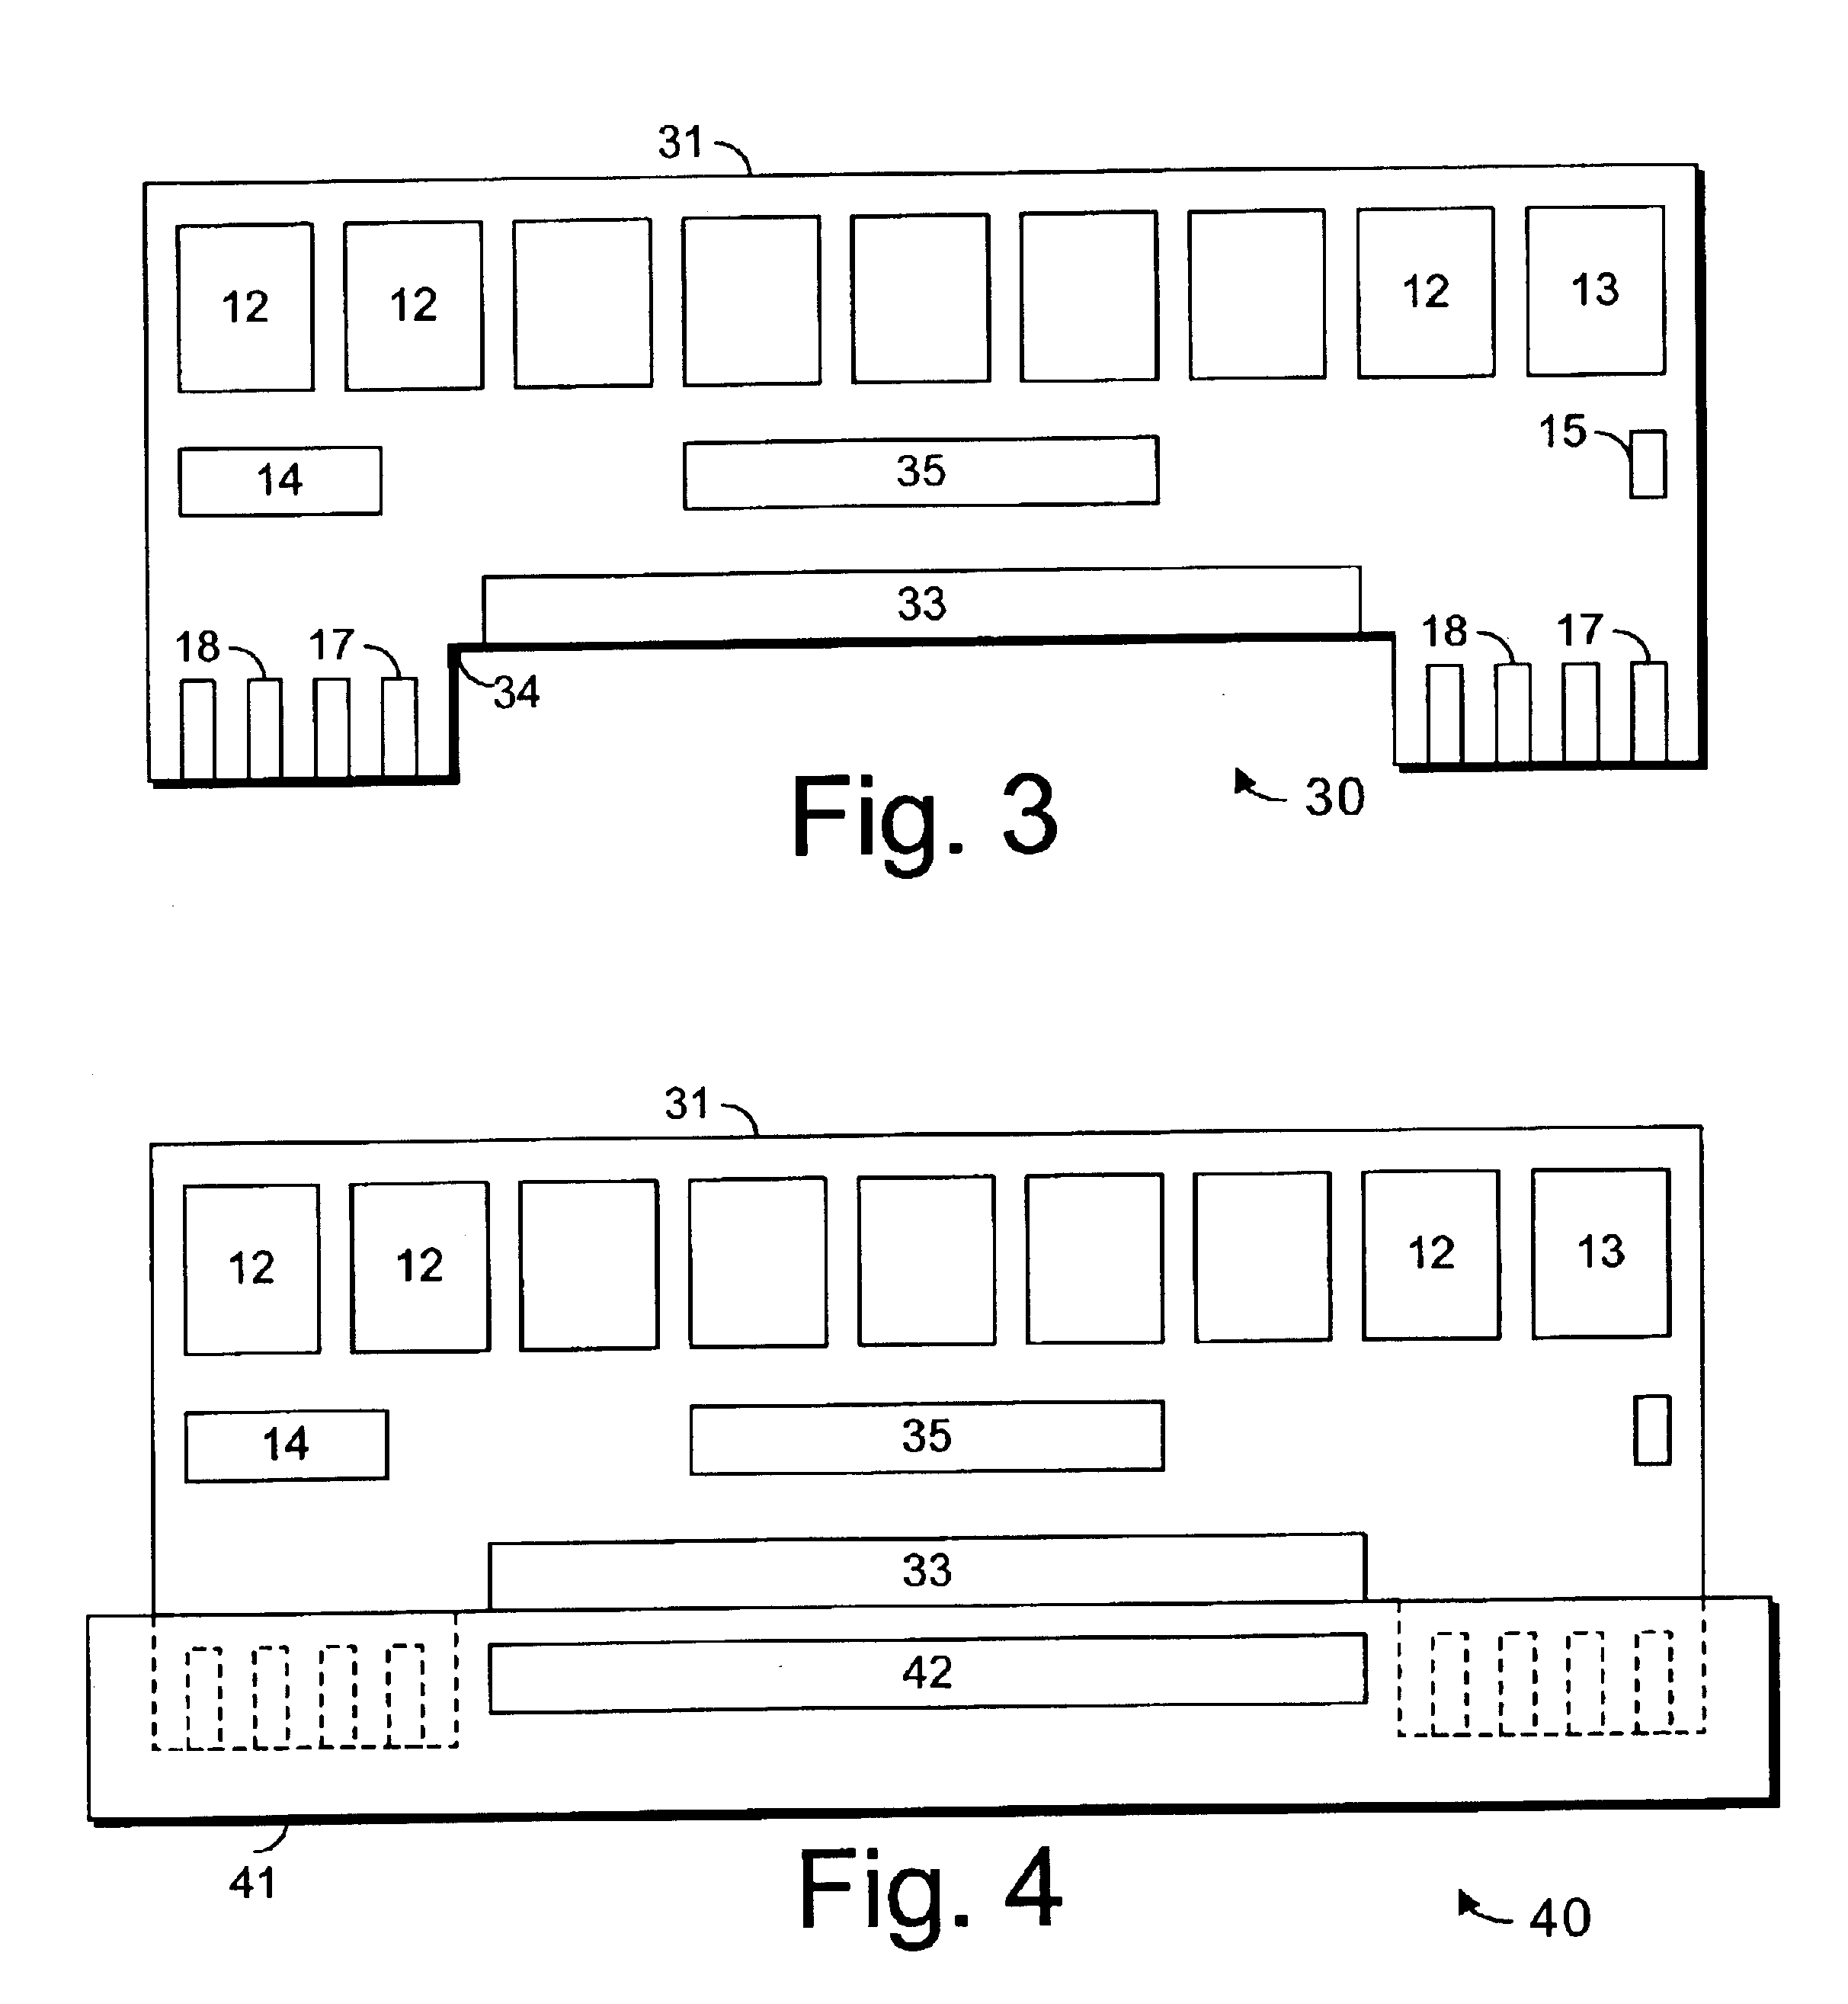 Module interface with optical and electrical interconnects